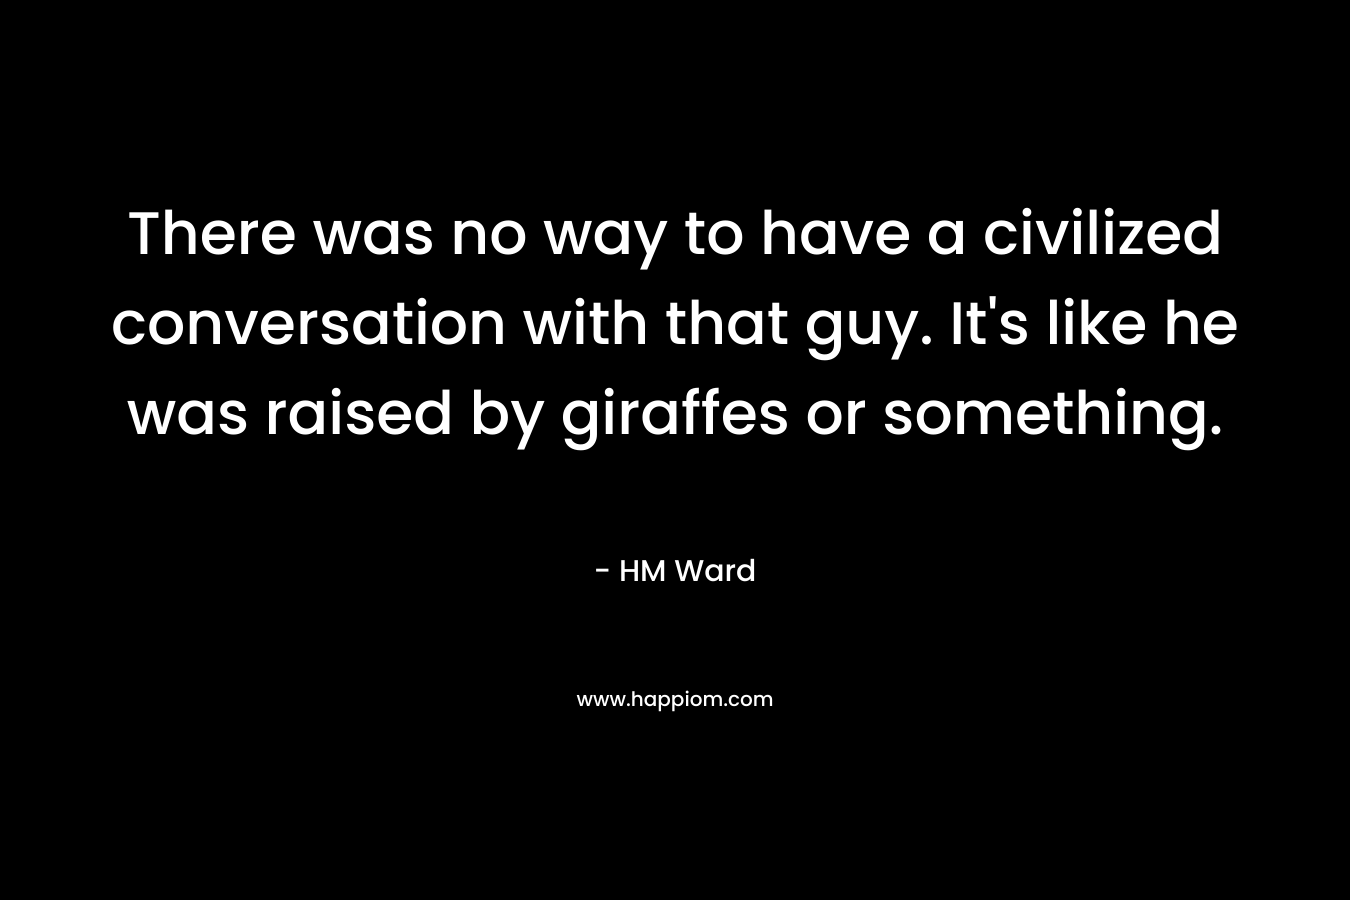 There was no way to have a civilized conversation with that guy. It's like he was raised by giraffes or something.